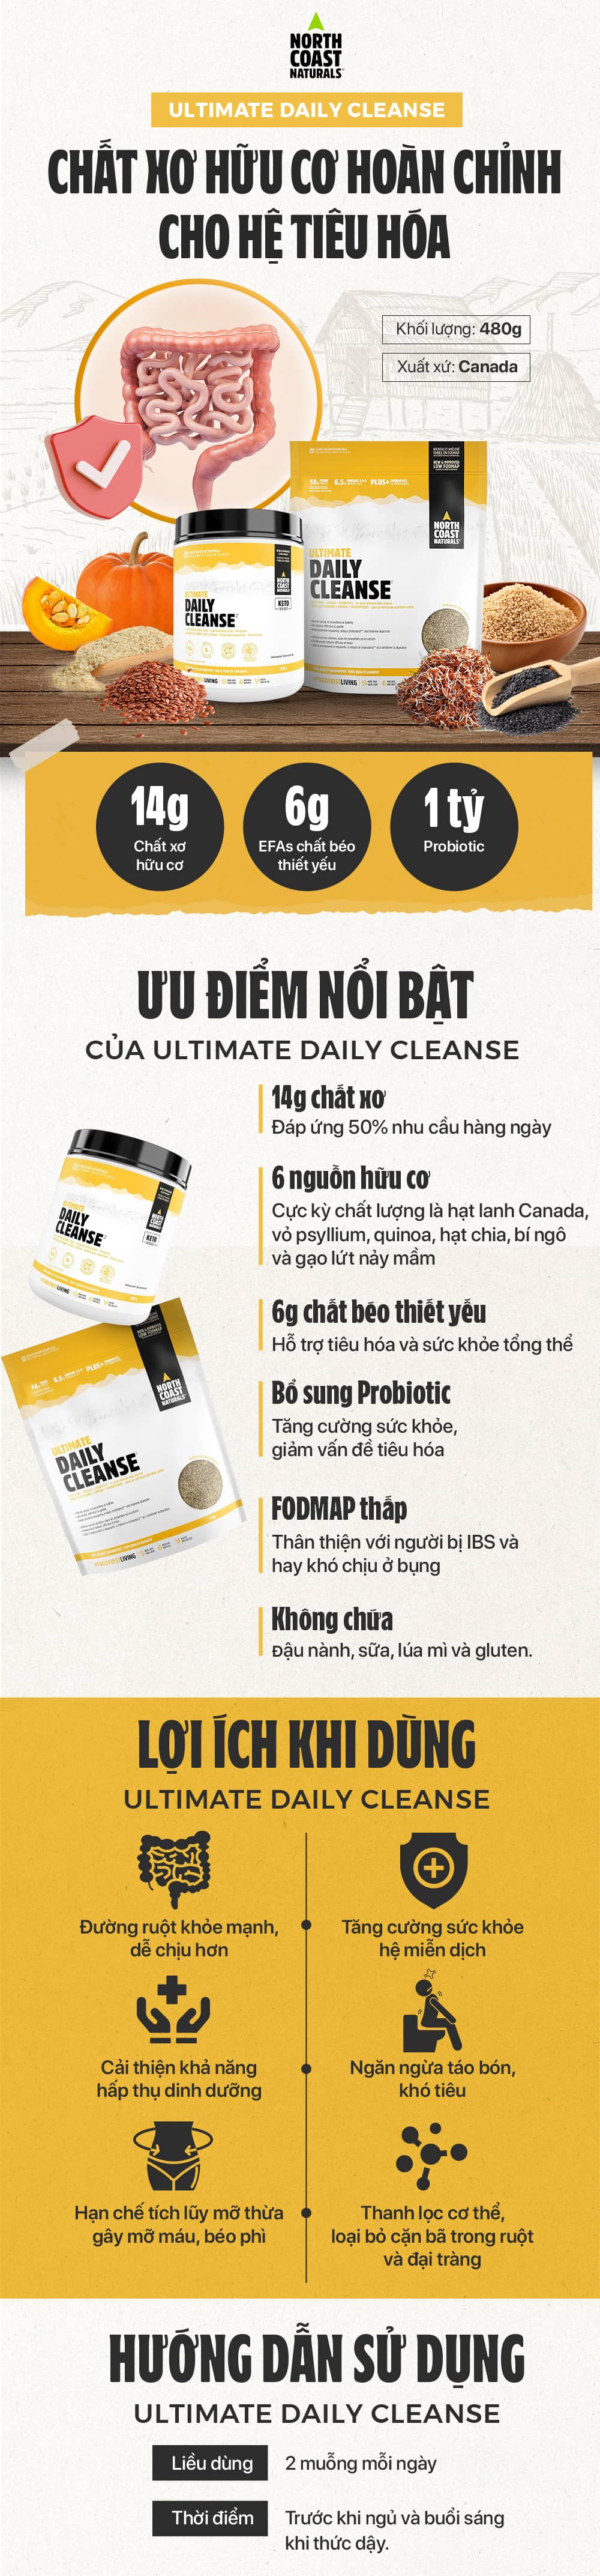 ultimate-daily-cleanse-gymstore